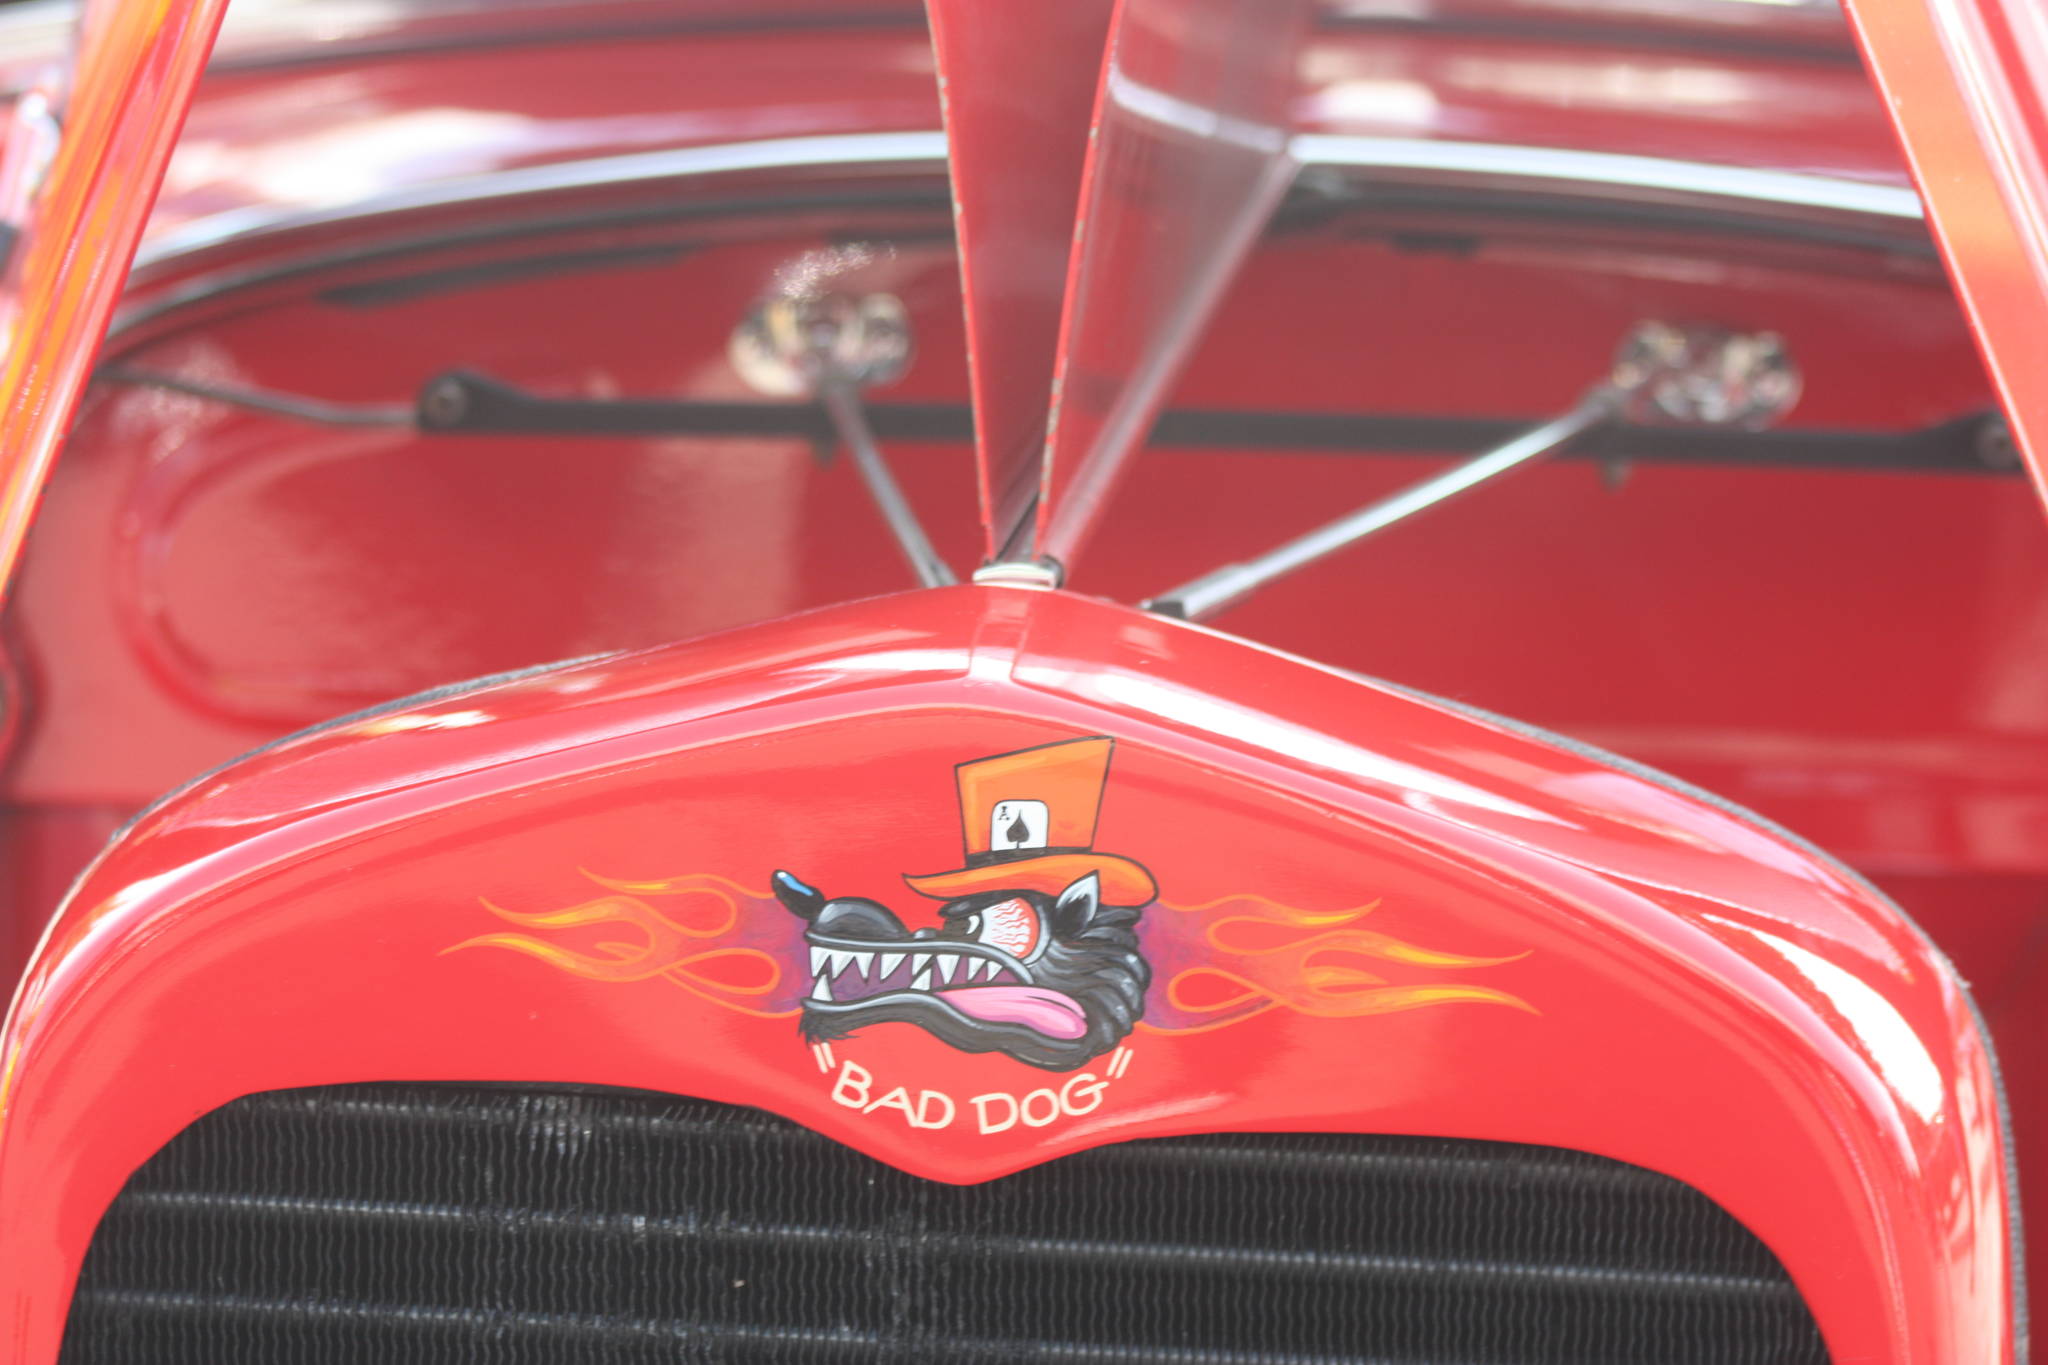 Rick Hagen’s 1931 Model A Ford “Bad Dog” comes in red and with an attitude.